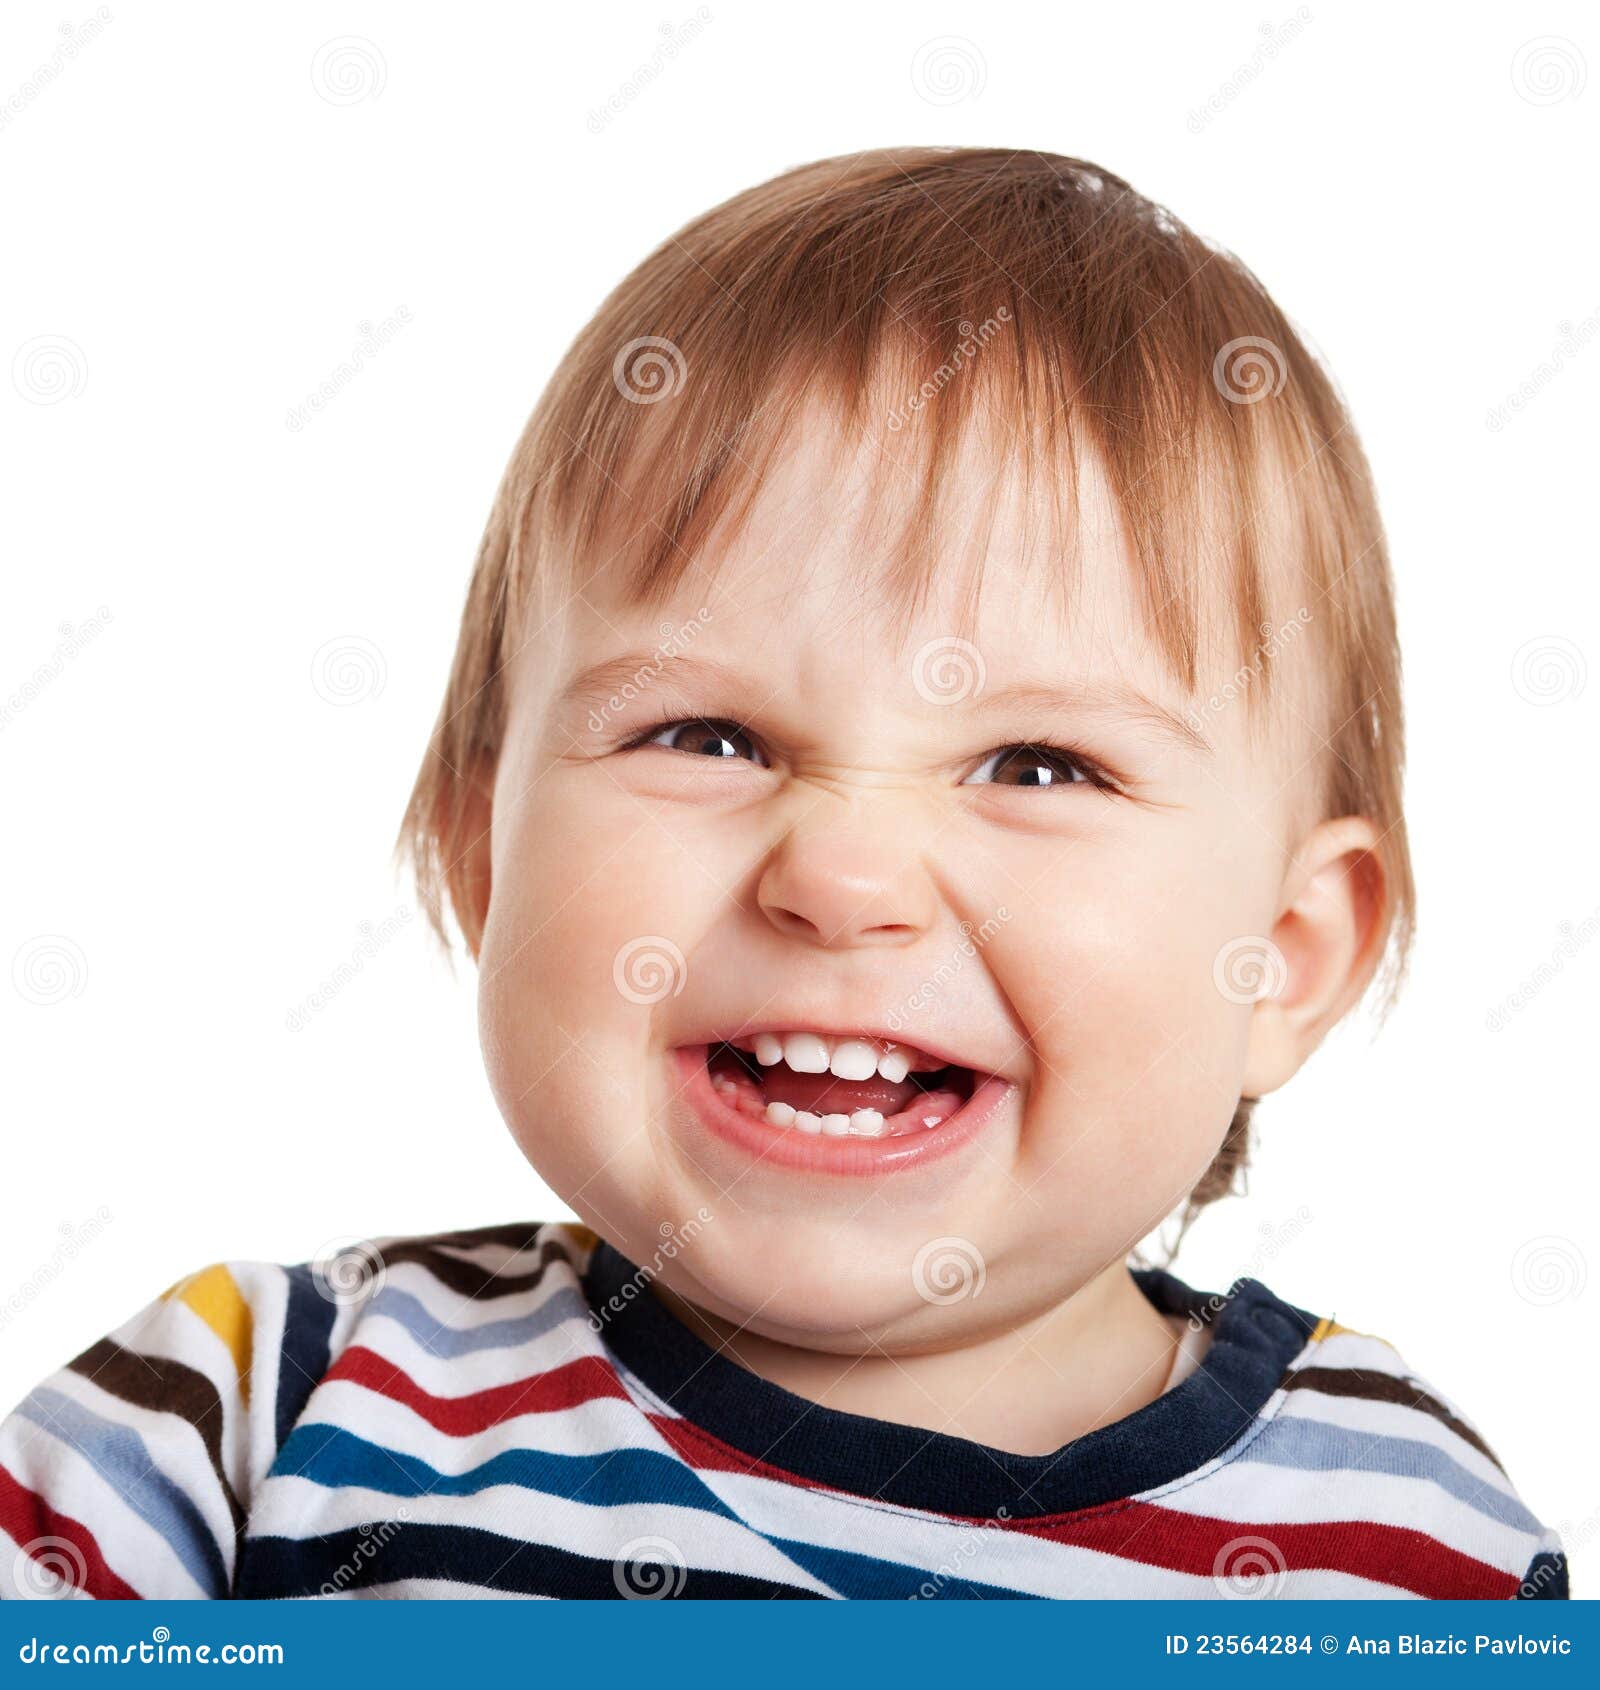 baby stock Image of leuk, grappig - 23564284